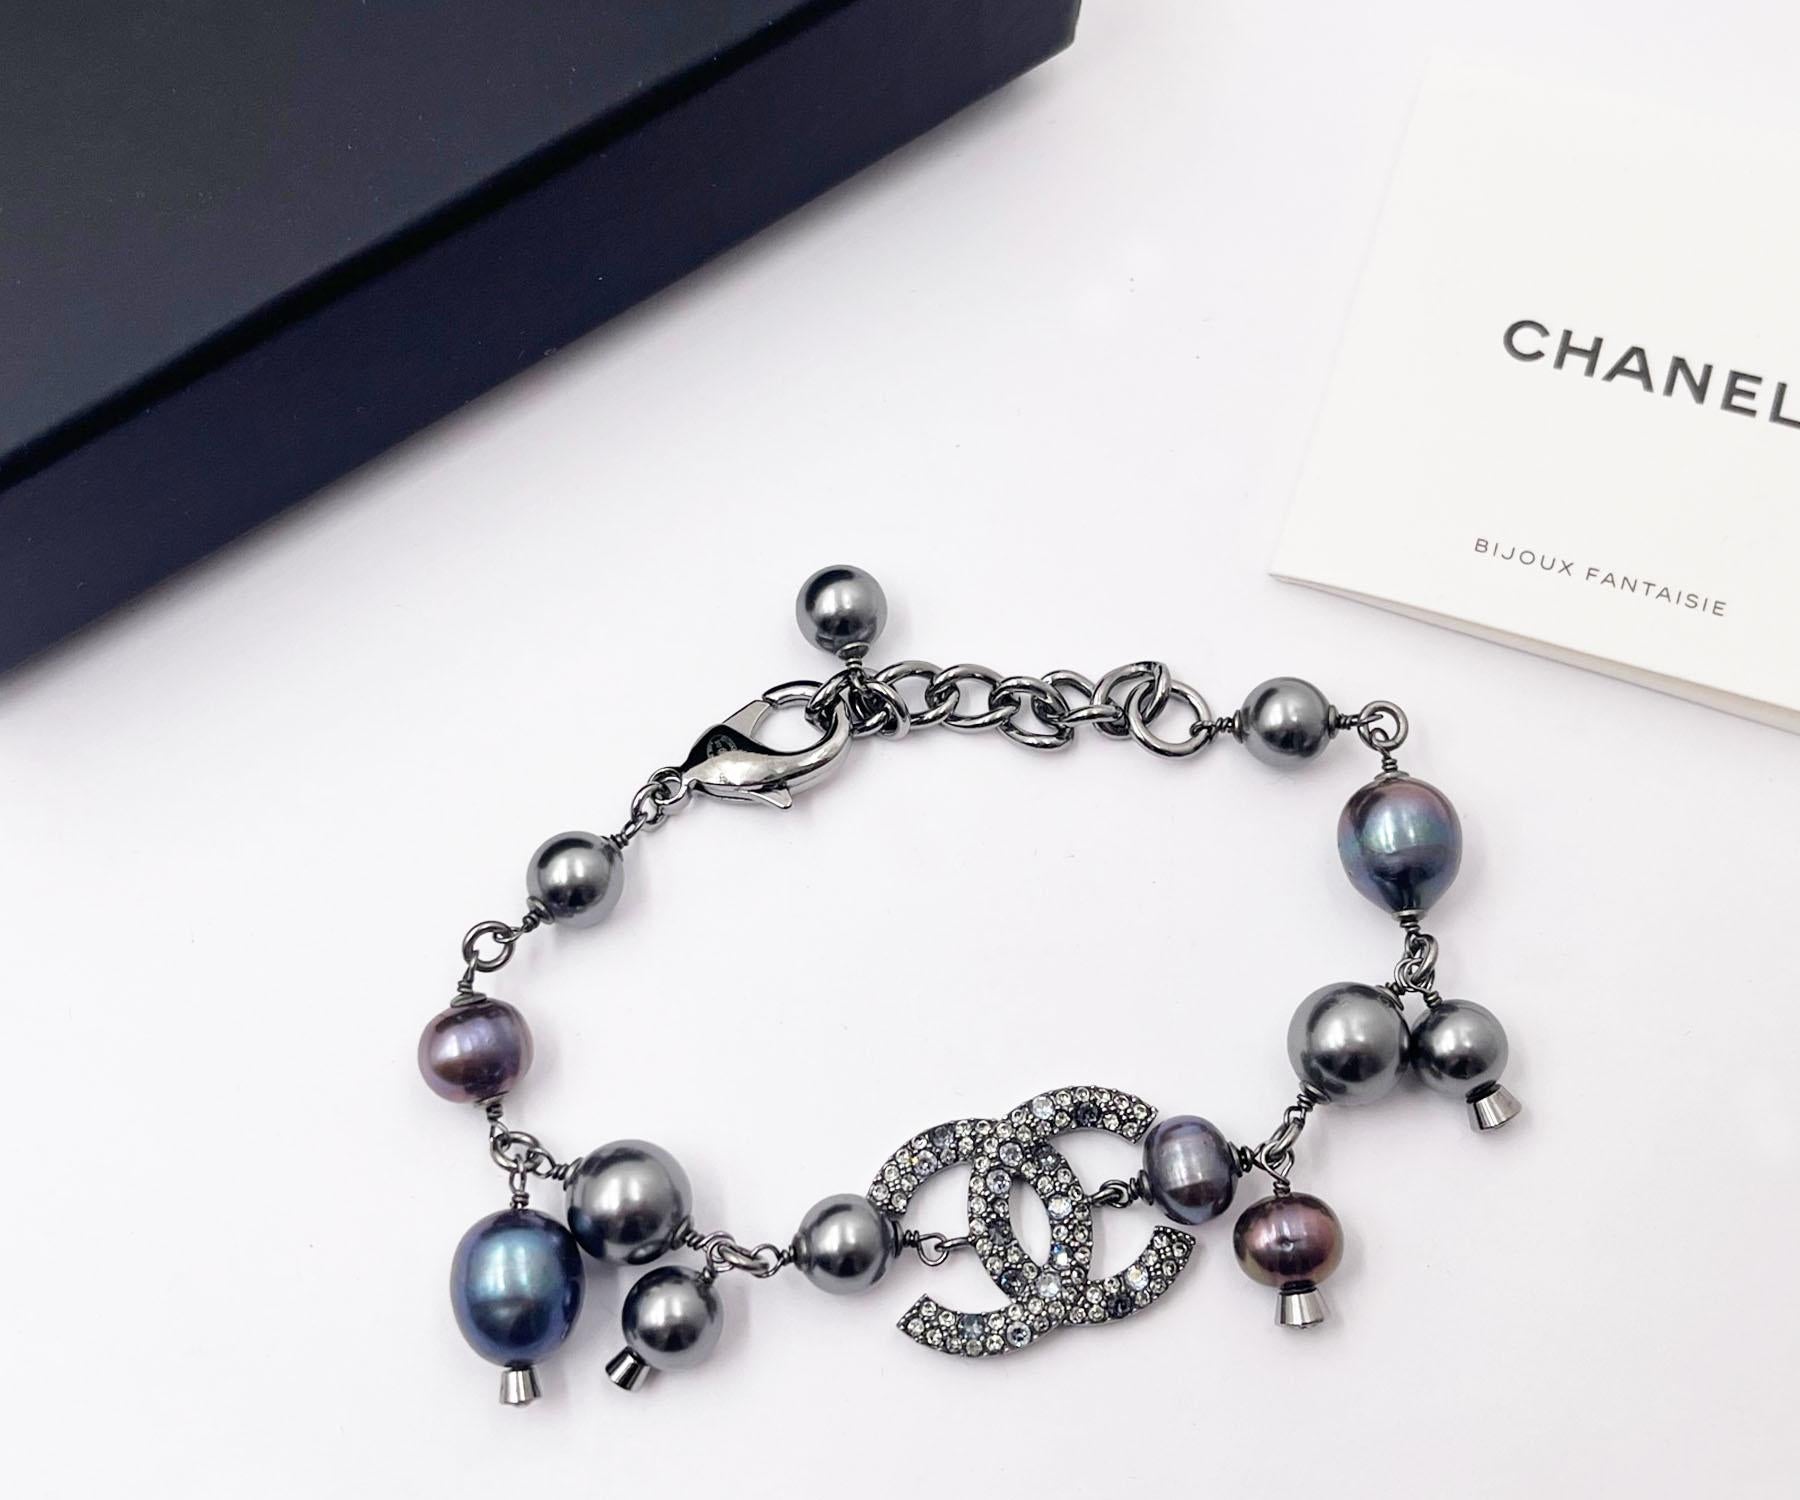 Chanel Grey CC Crystal Fresh Water Bracelet

*Marked 17
*Made in Italy
*Comes with the original box, pouch and booklet

-It is approximately 9